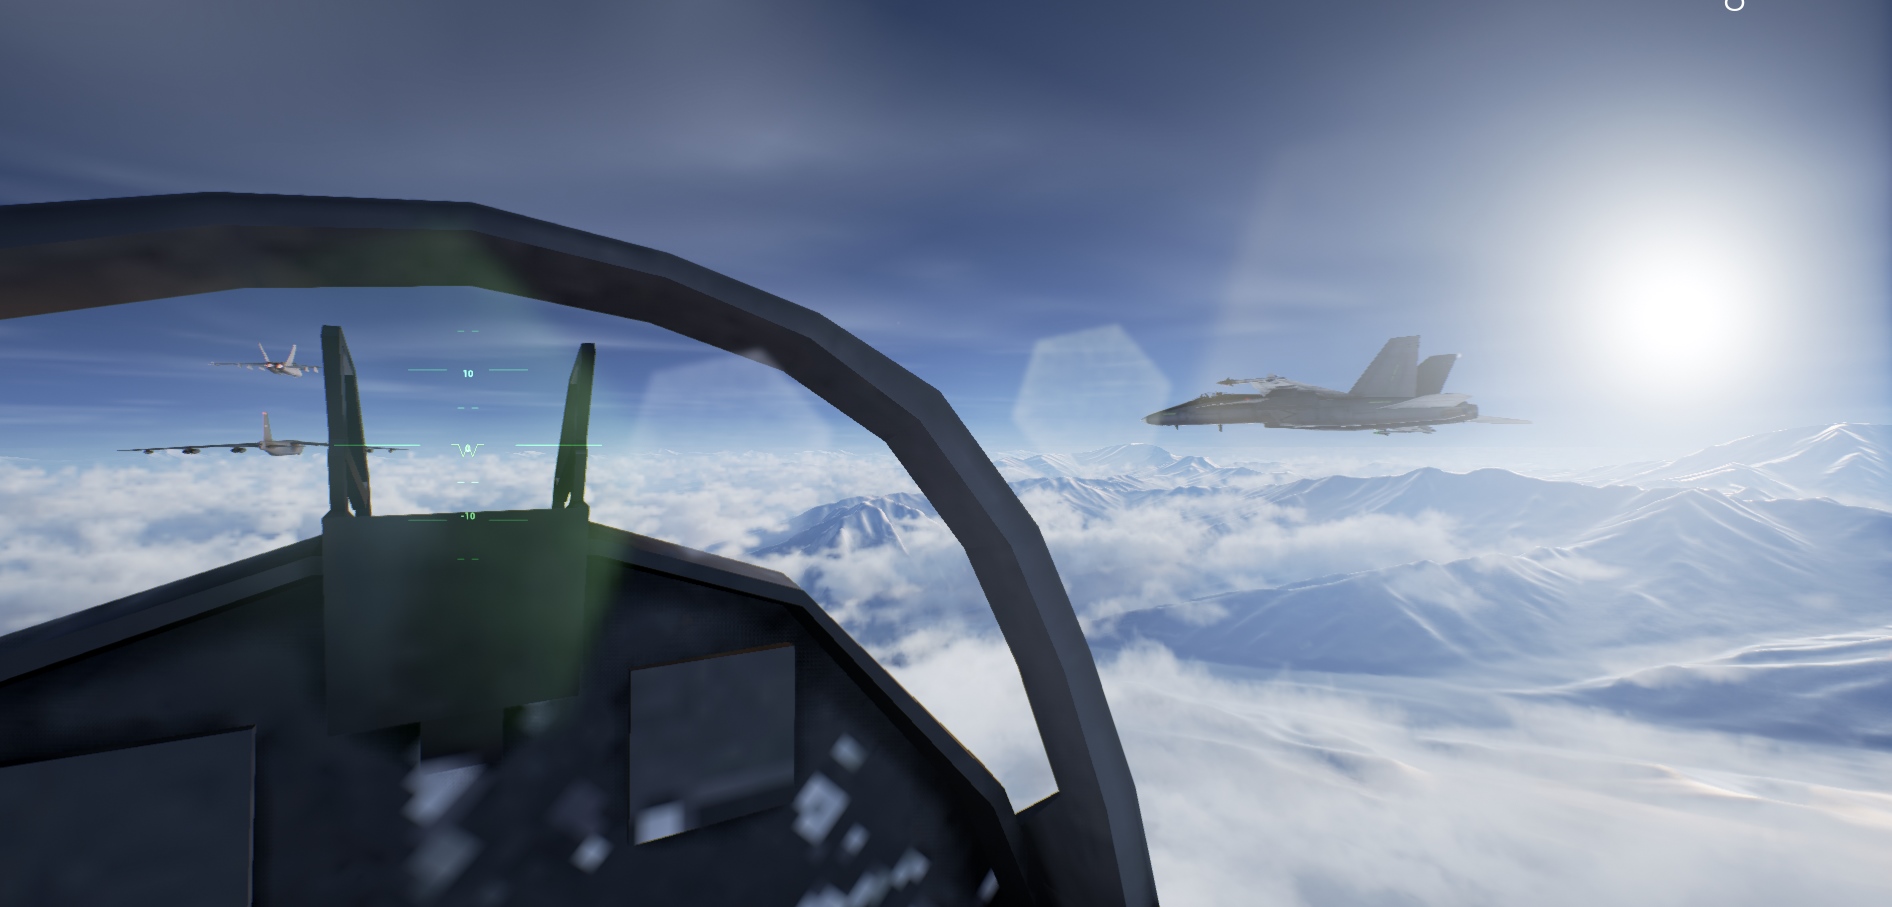 download free project wingman game